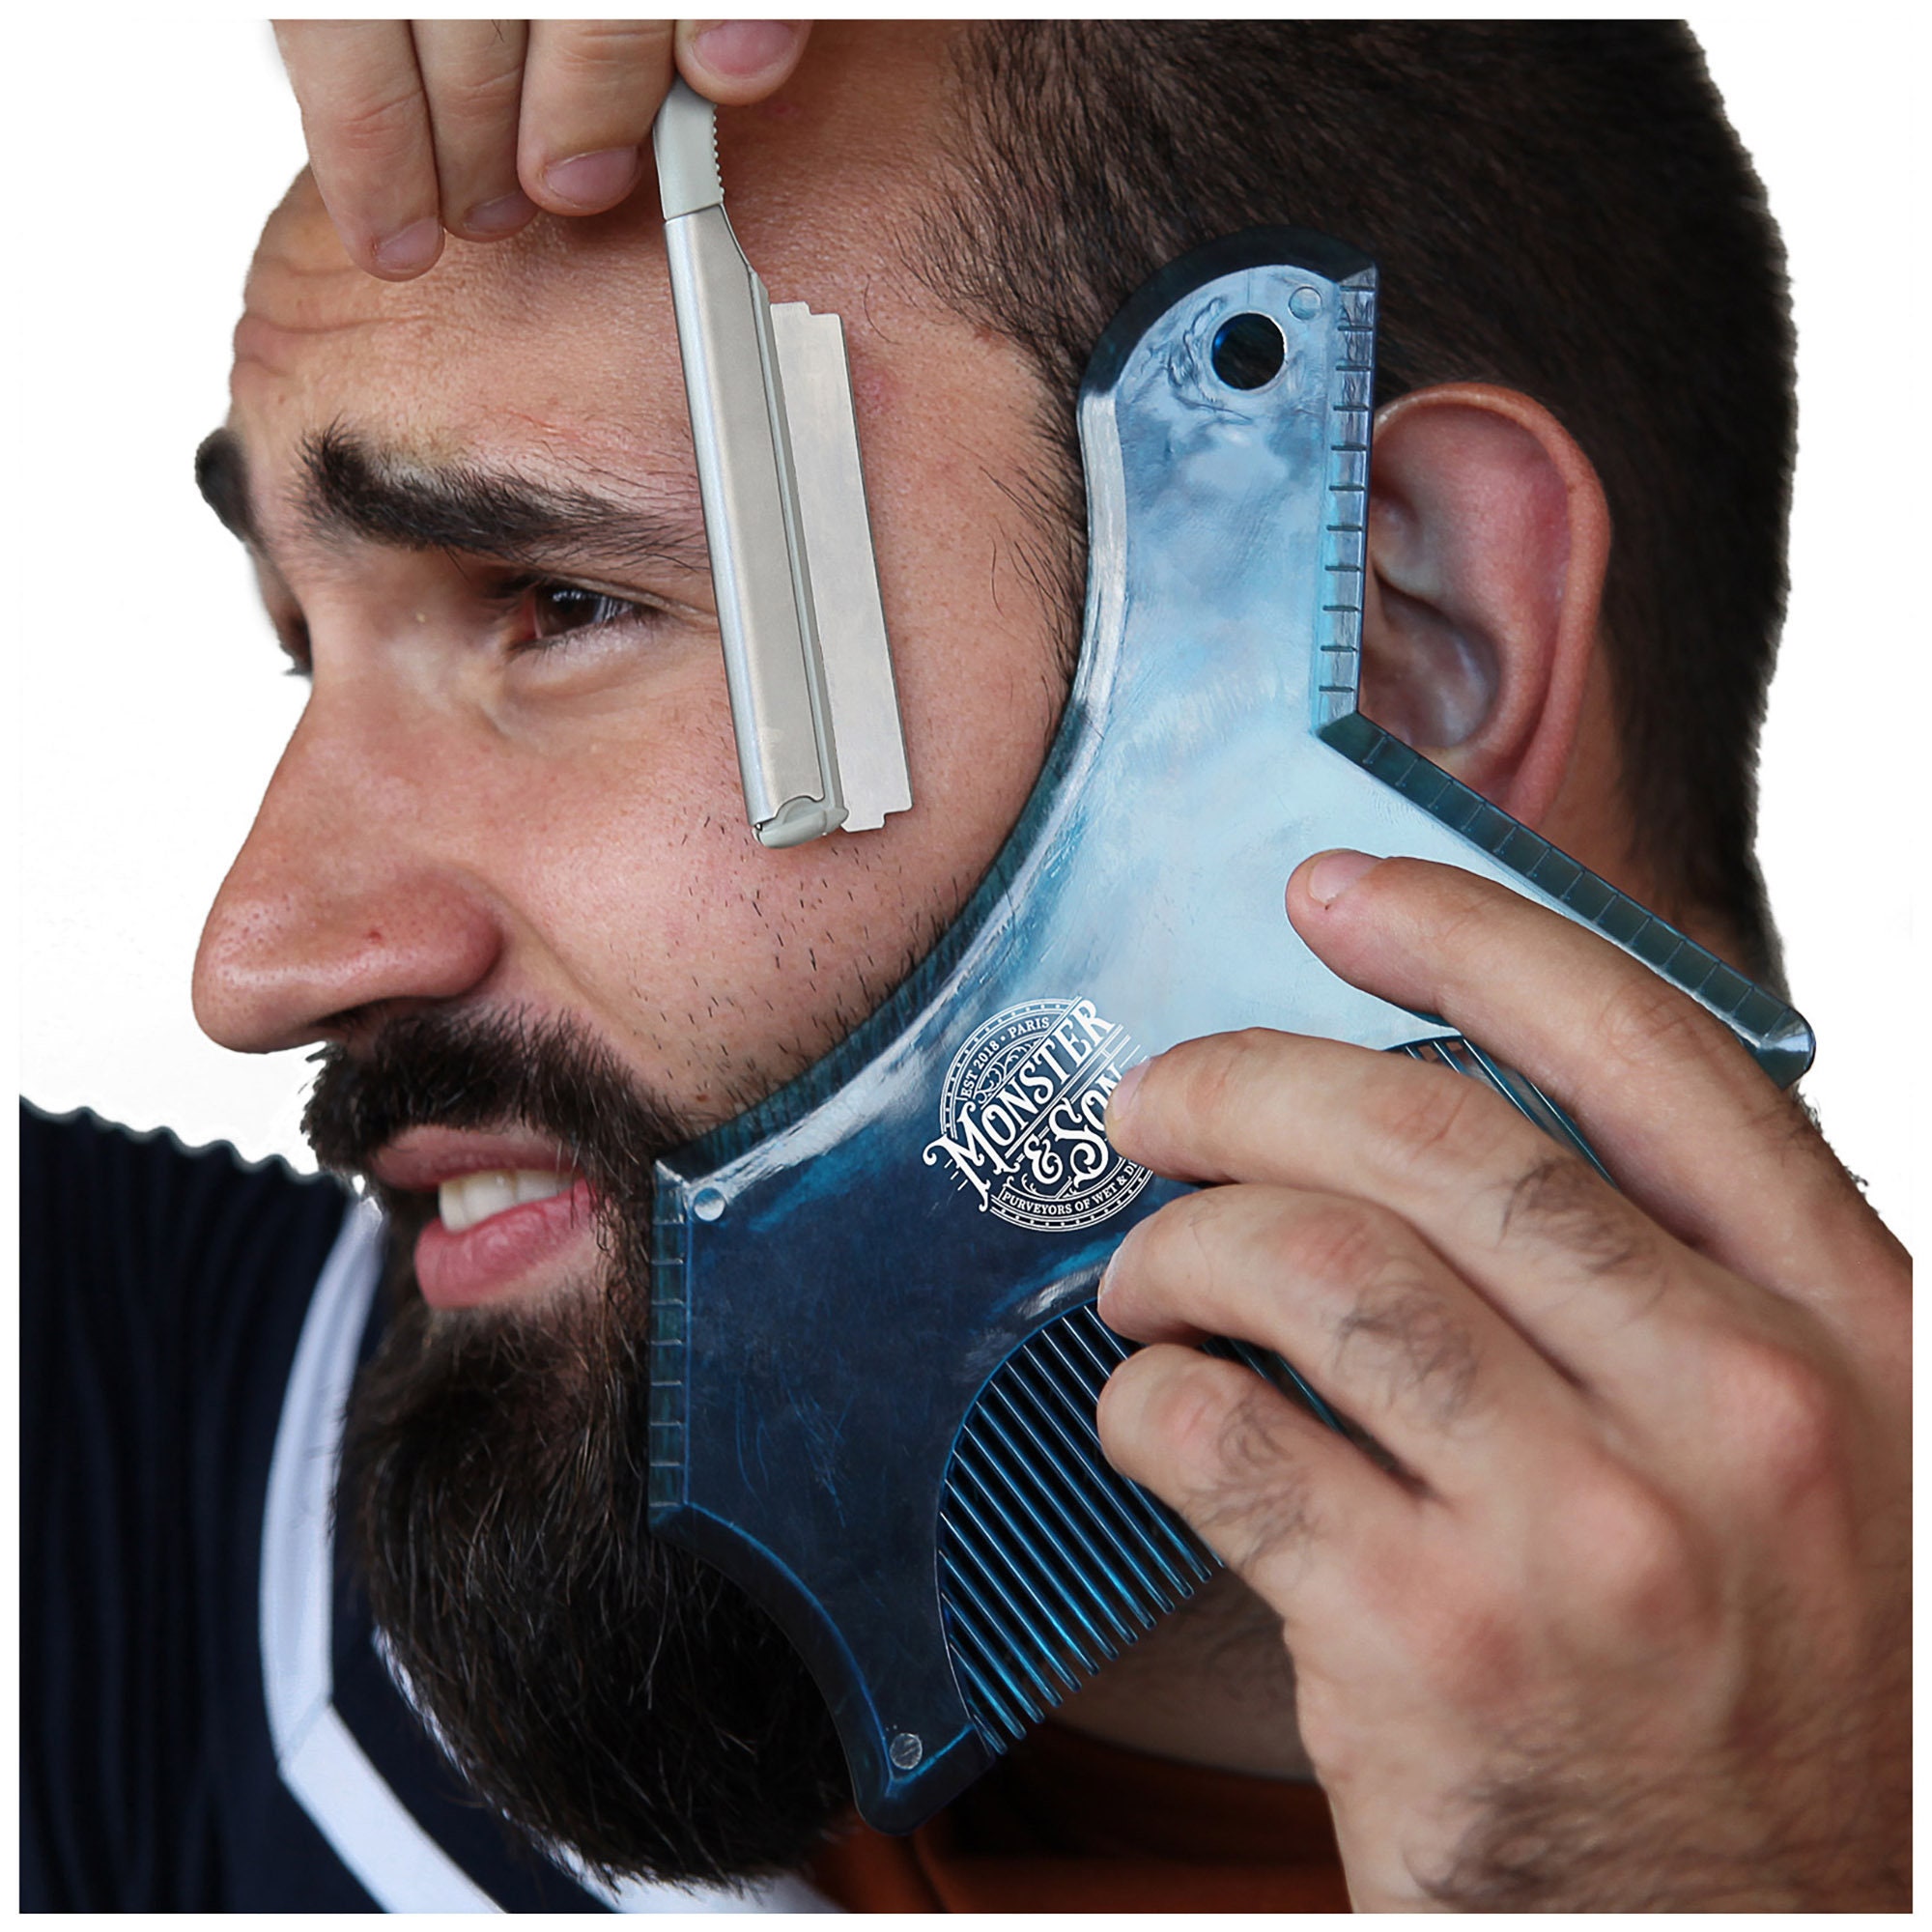 Quality Time Beard Neckline Shaper Guide; A Hands-Free, Flexible and  Adjustable Beard Template, Do-it